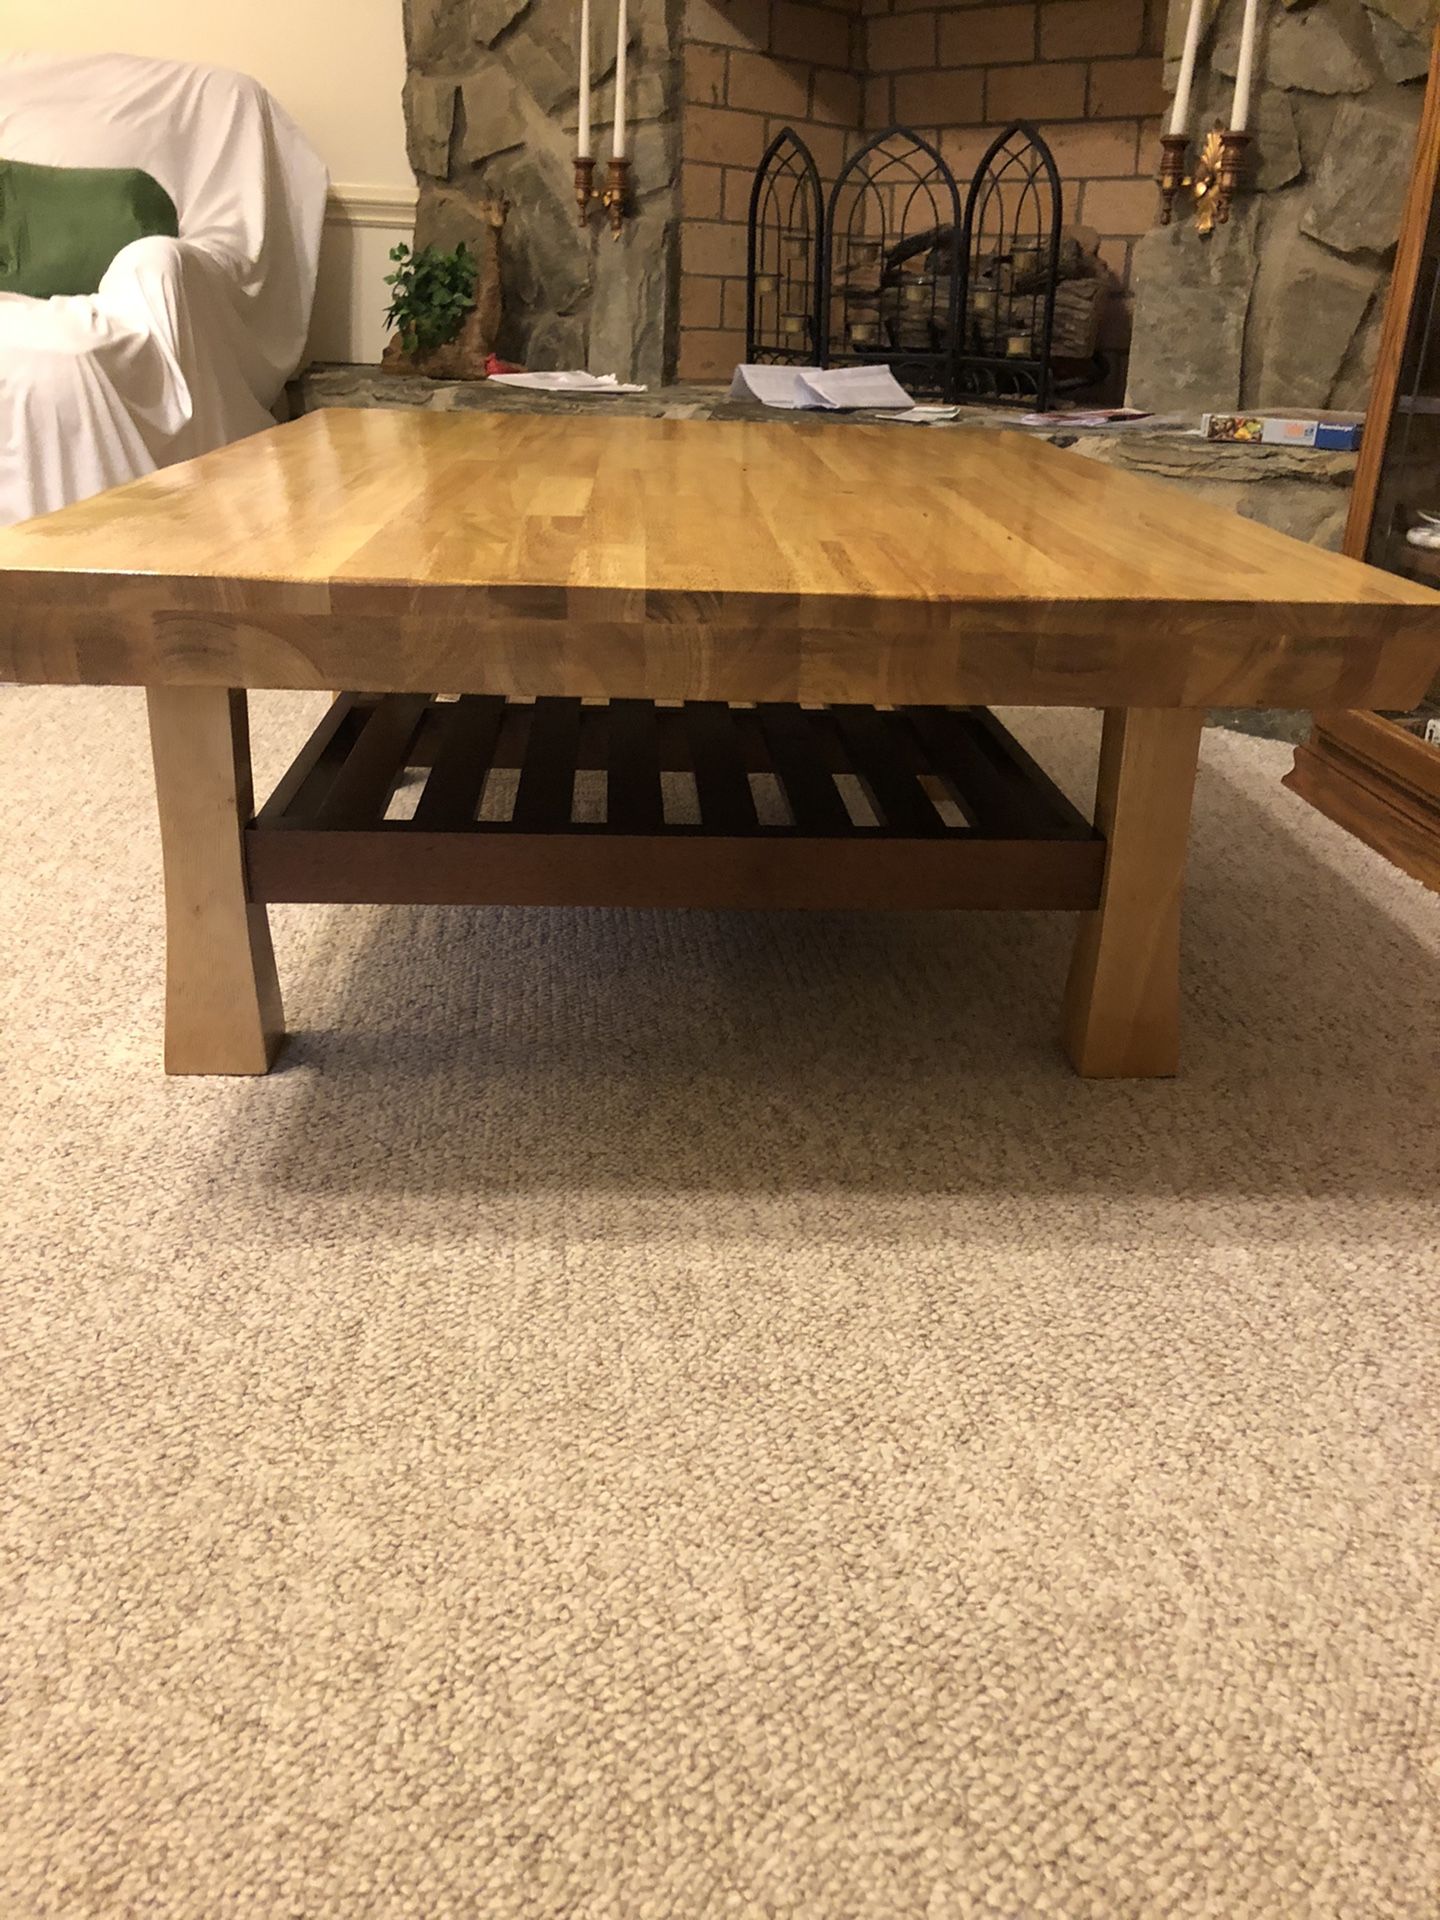 2 toned refinished coffee table (like new)